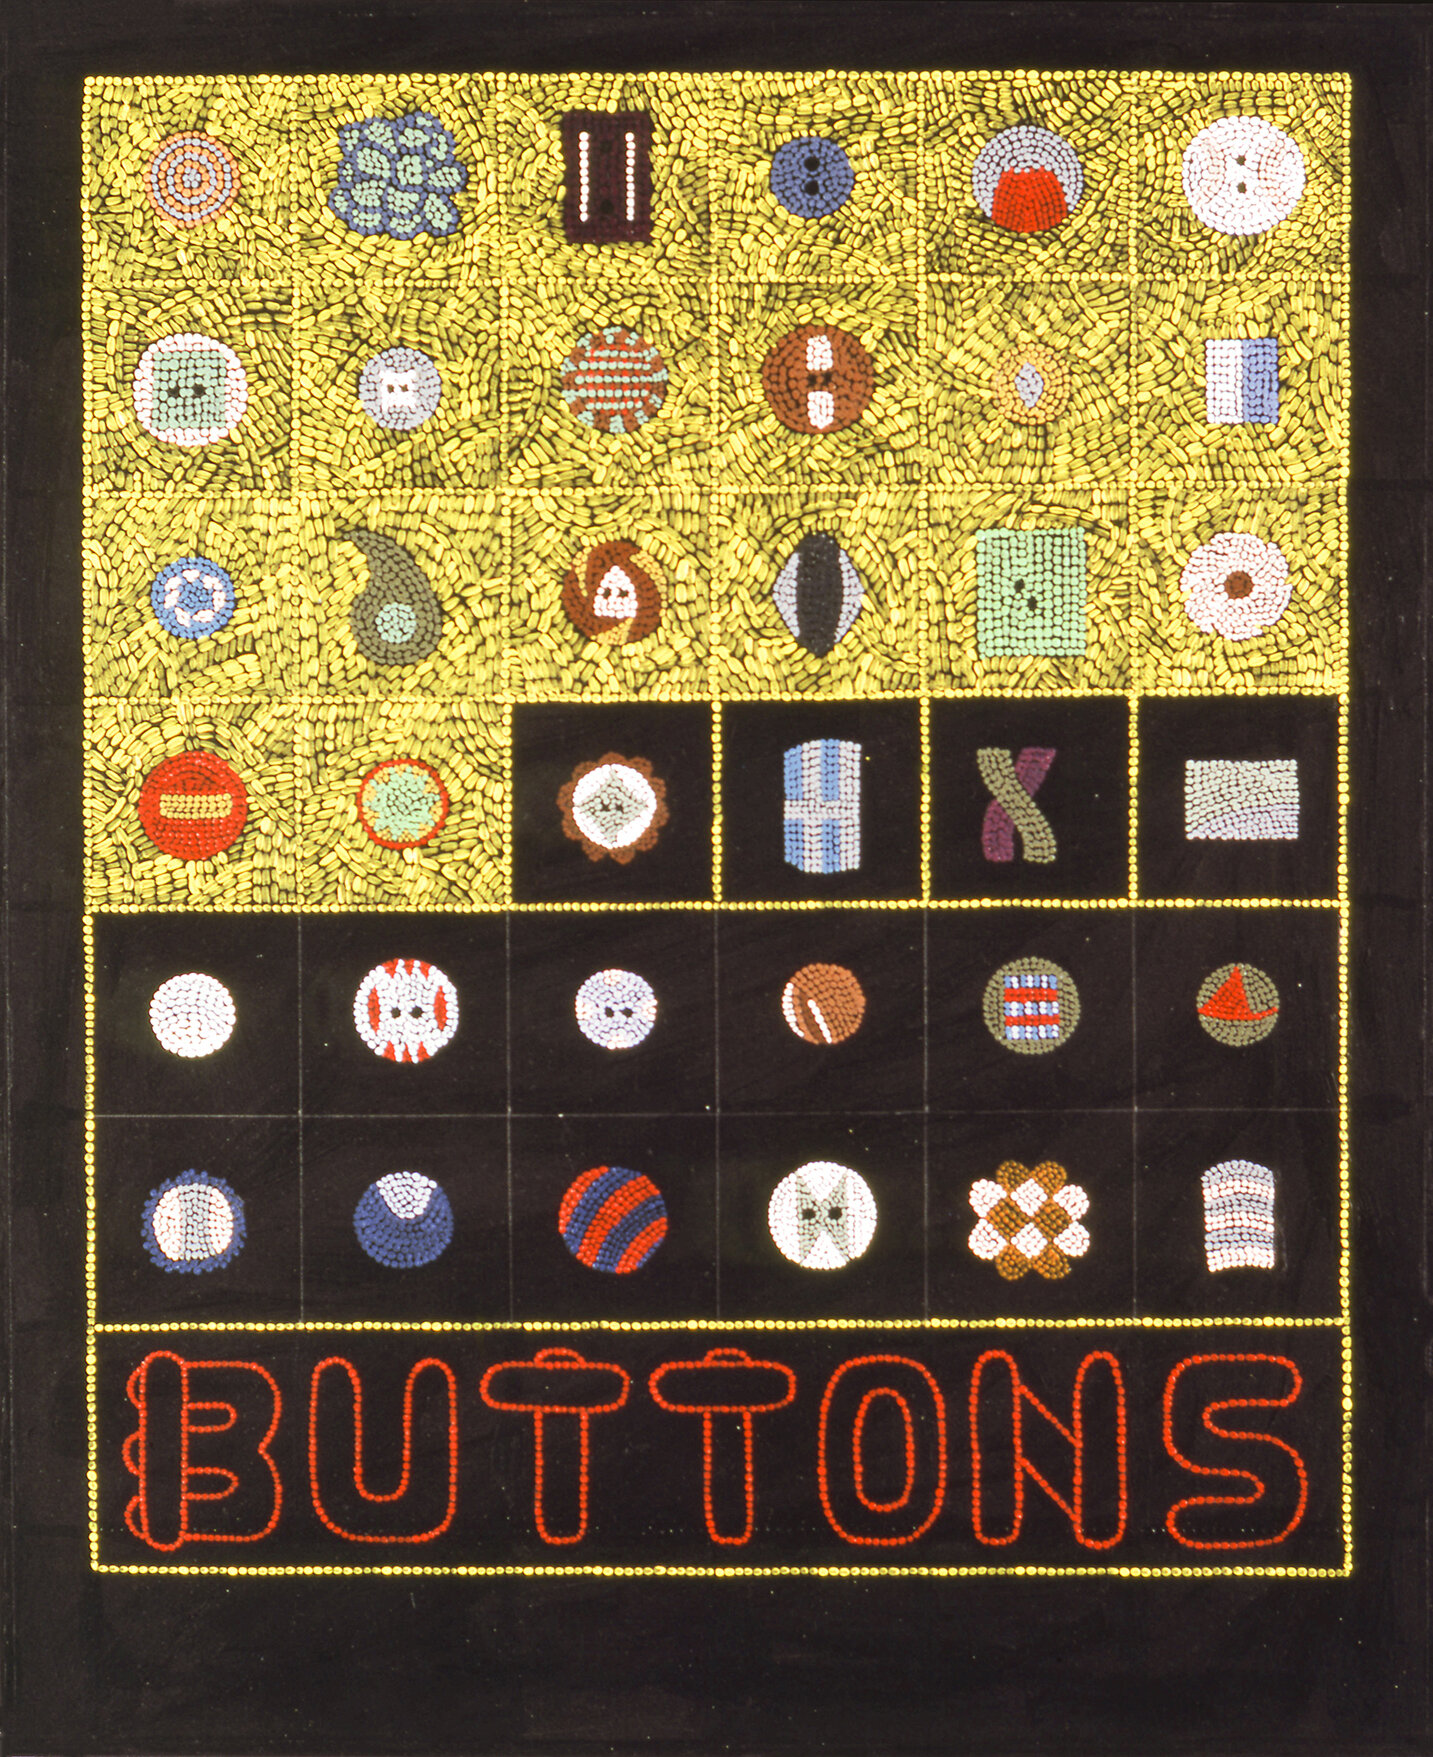   Buttons , 1973, acrylic, paper, 14 x 17 inches. Private Collection, Seattle 